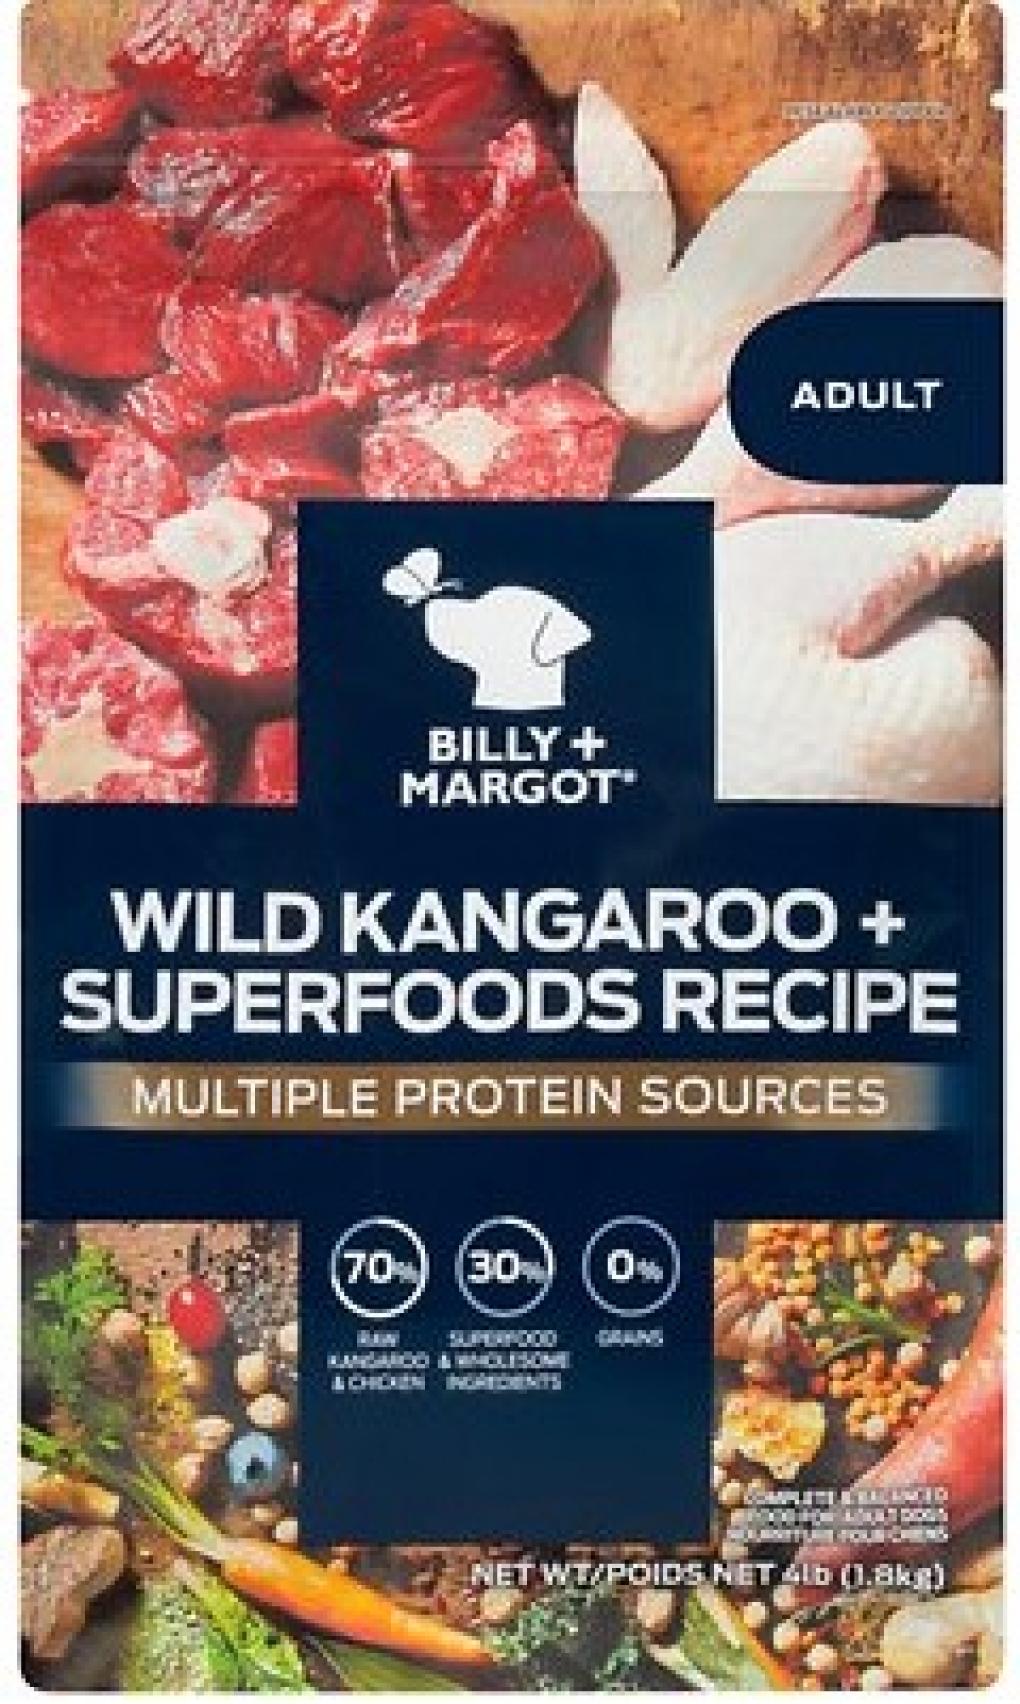 Real Pet Food Company recalls a lot of Billy+Margot Wild Kangaroo and Superfoods recipe dog food due to Salmonella